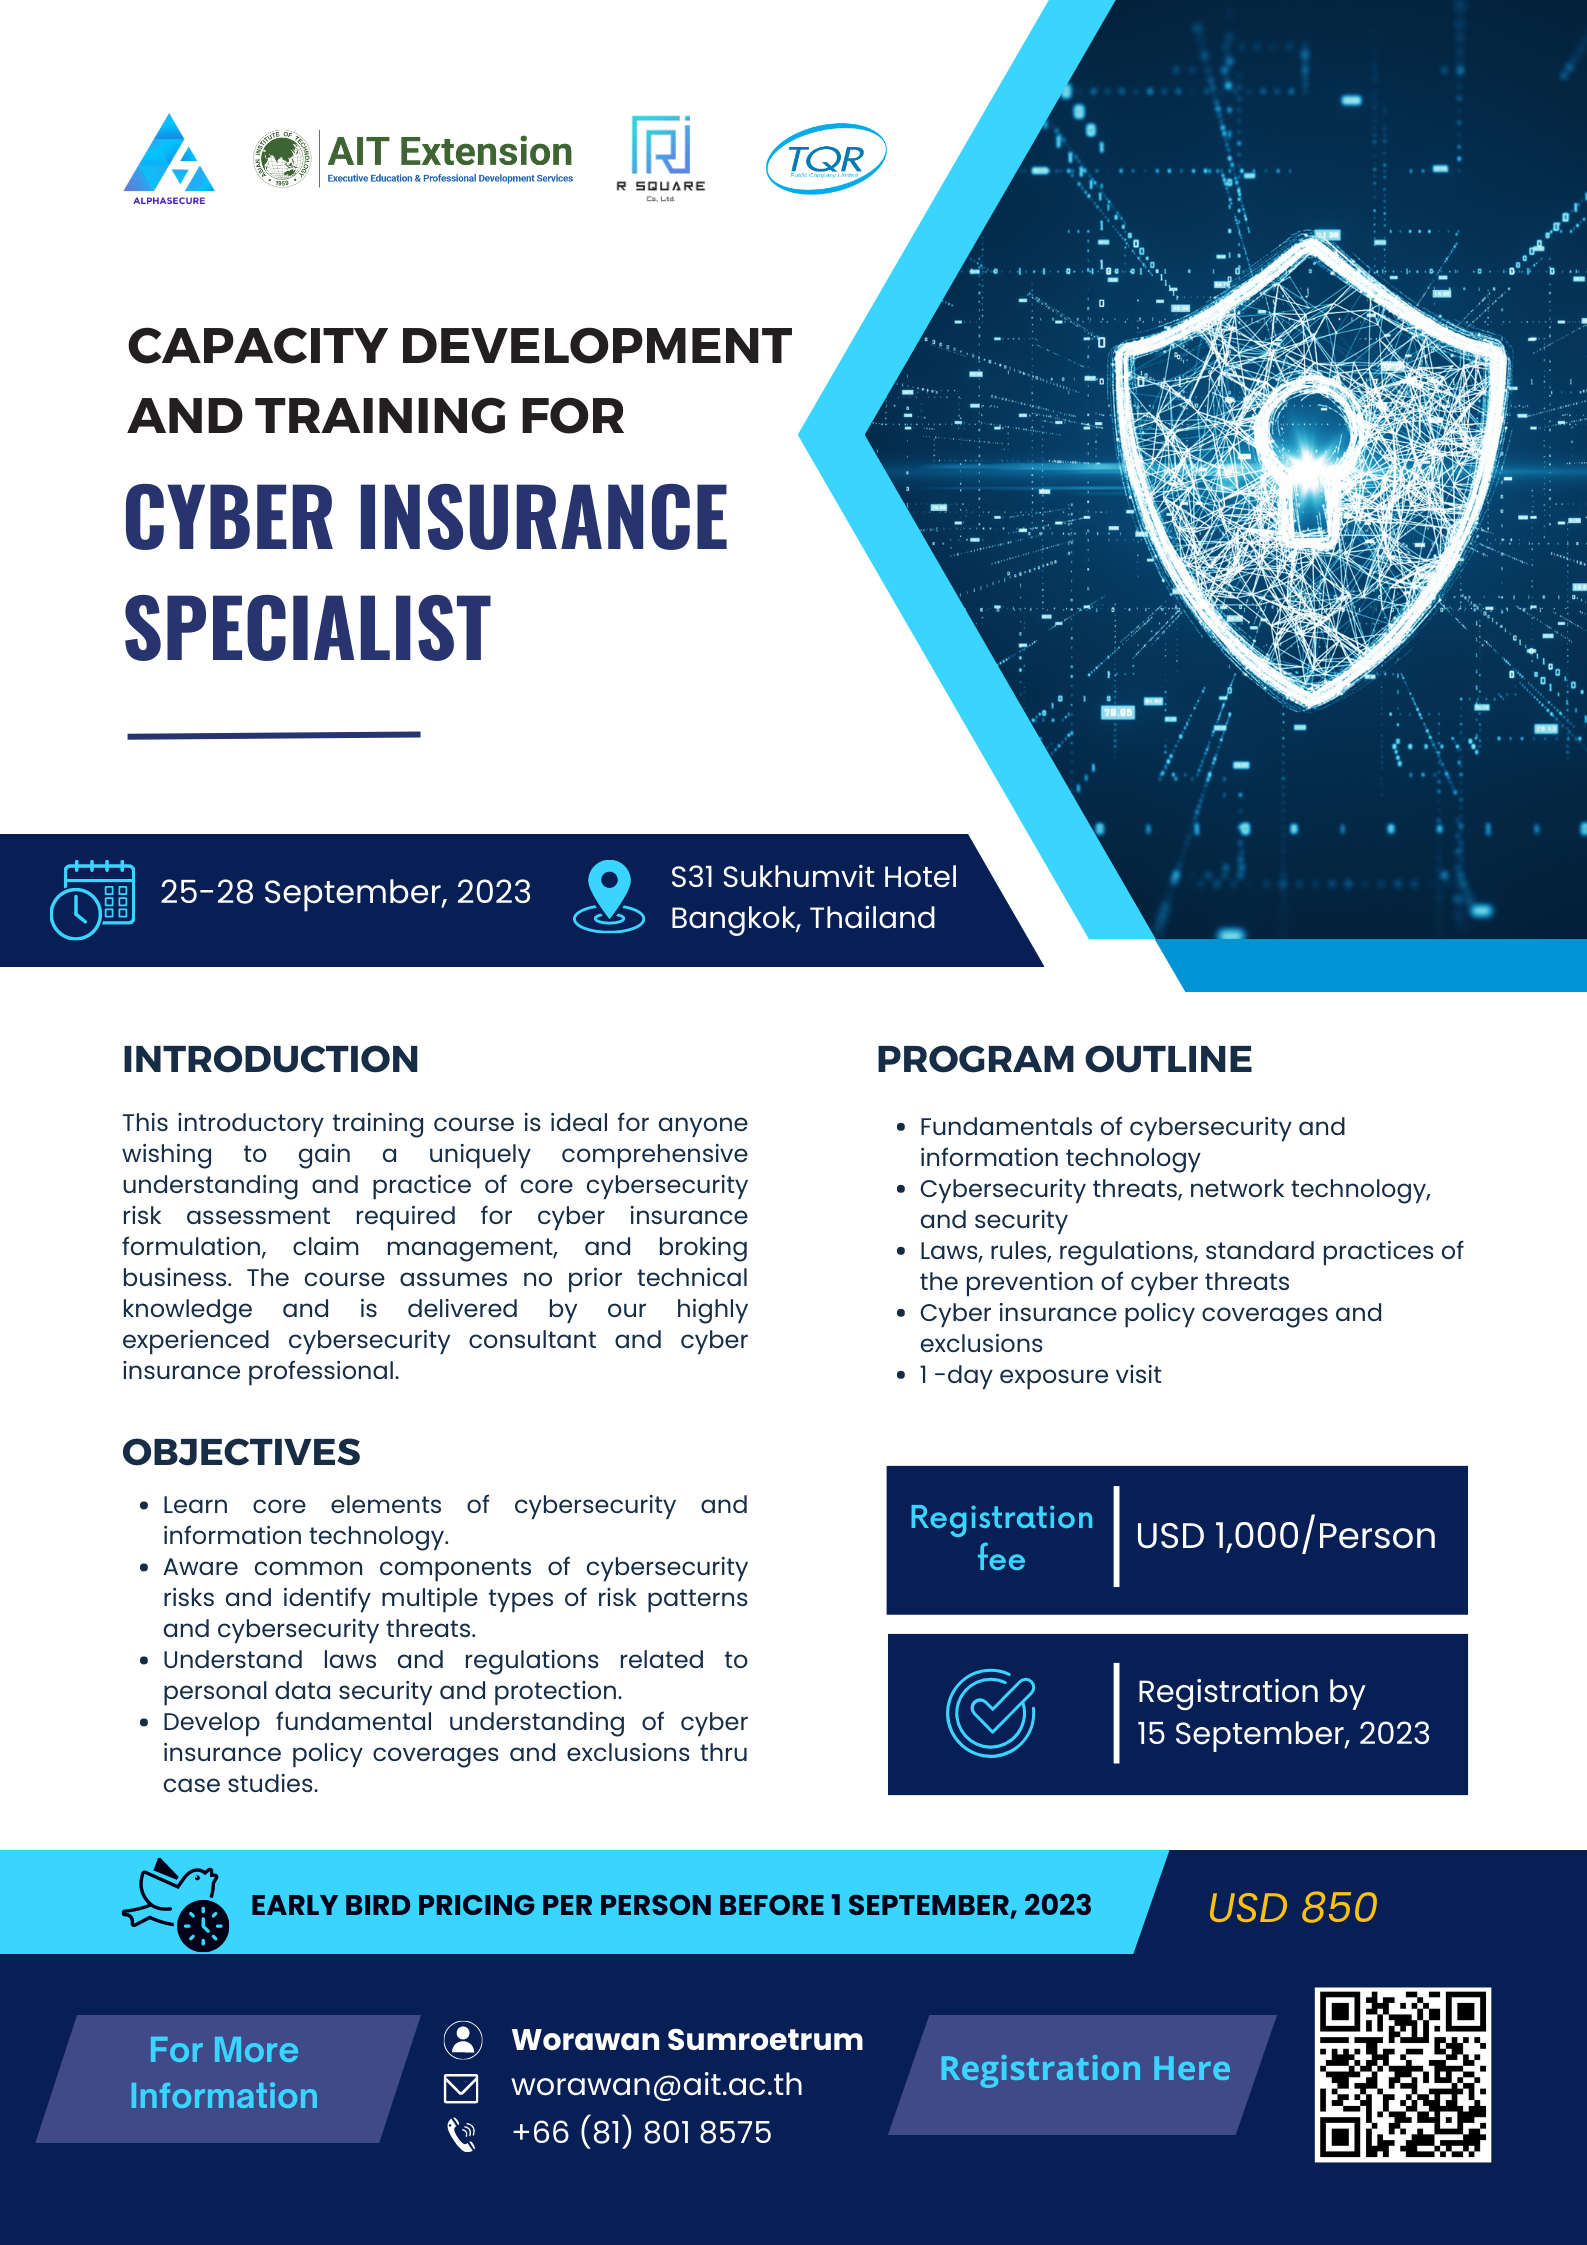 Capacity Development and Training for Cyber Insurance Specialist